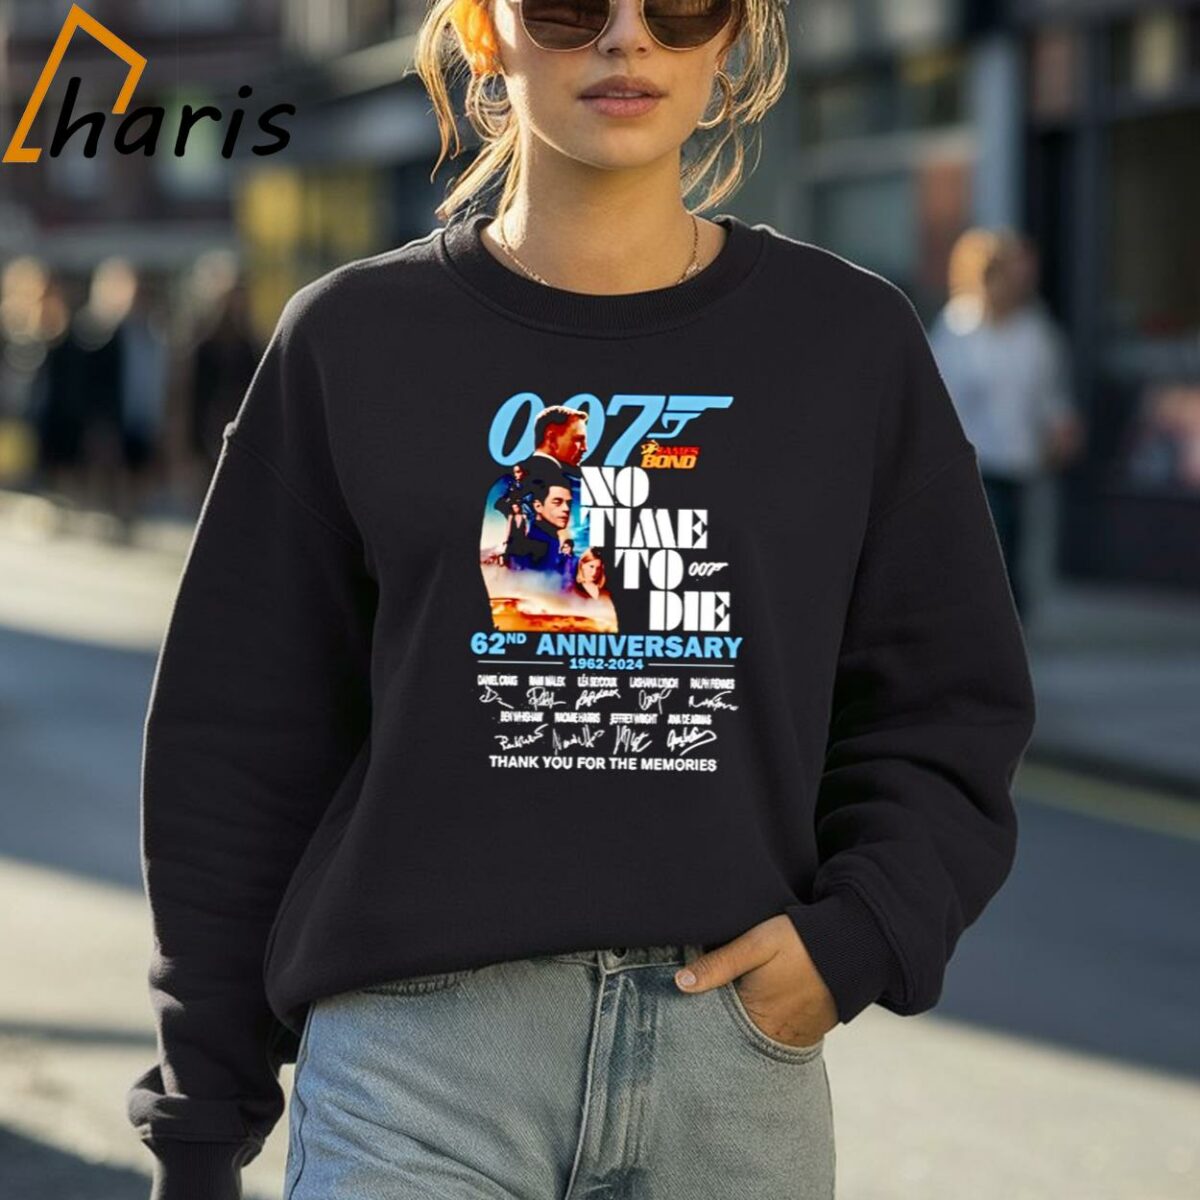 007 James Bond No Time To Die 62nd Anniversary 1962 2024 Thank You For The Memories Signatures T shirt 4 Sweatshirt